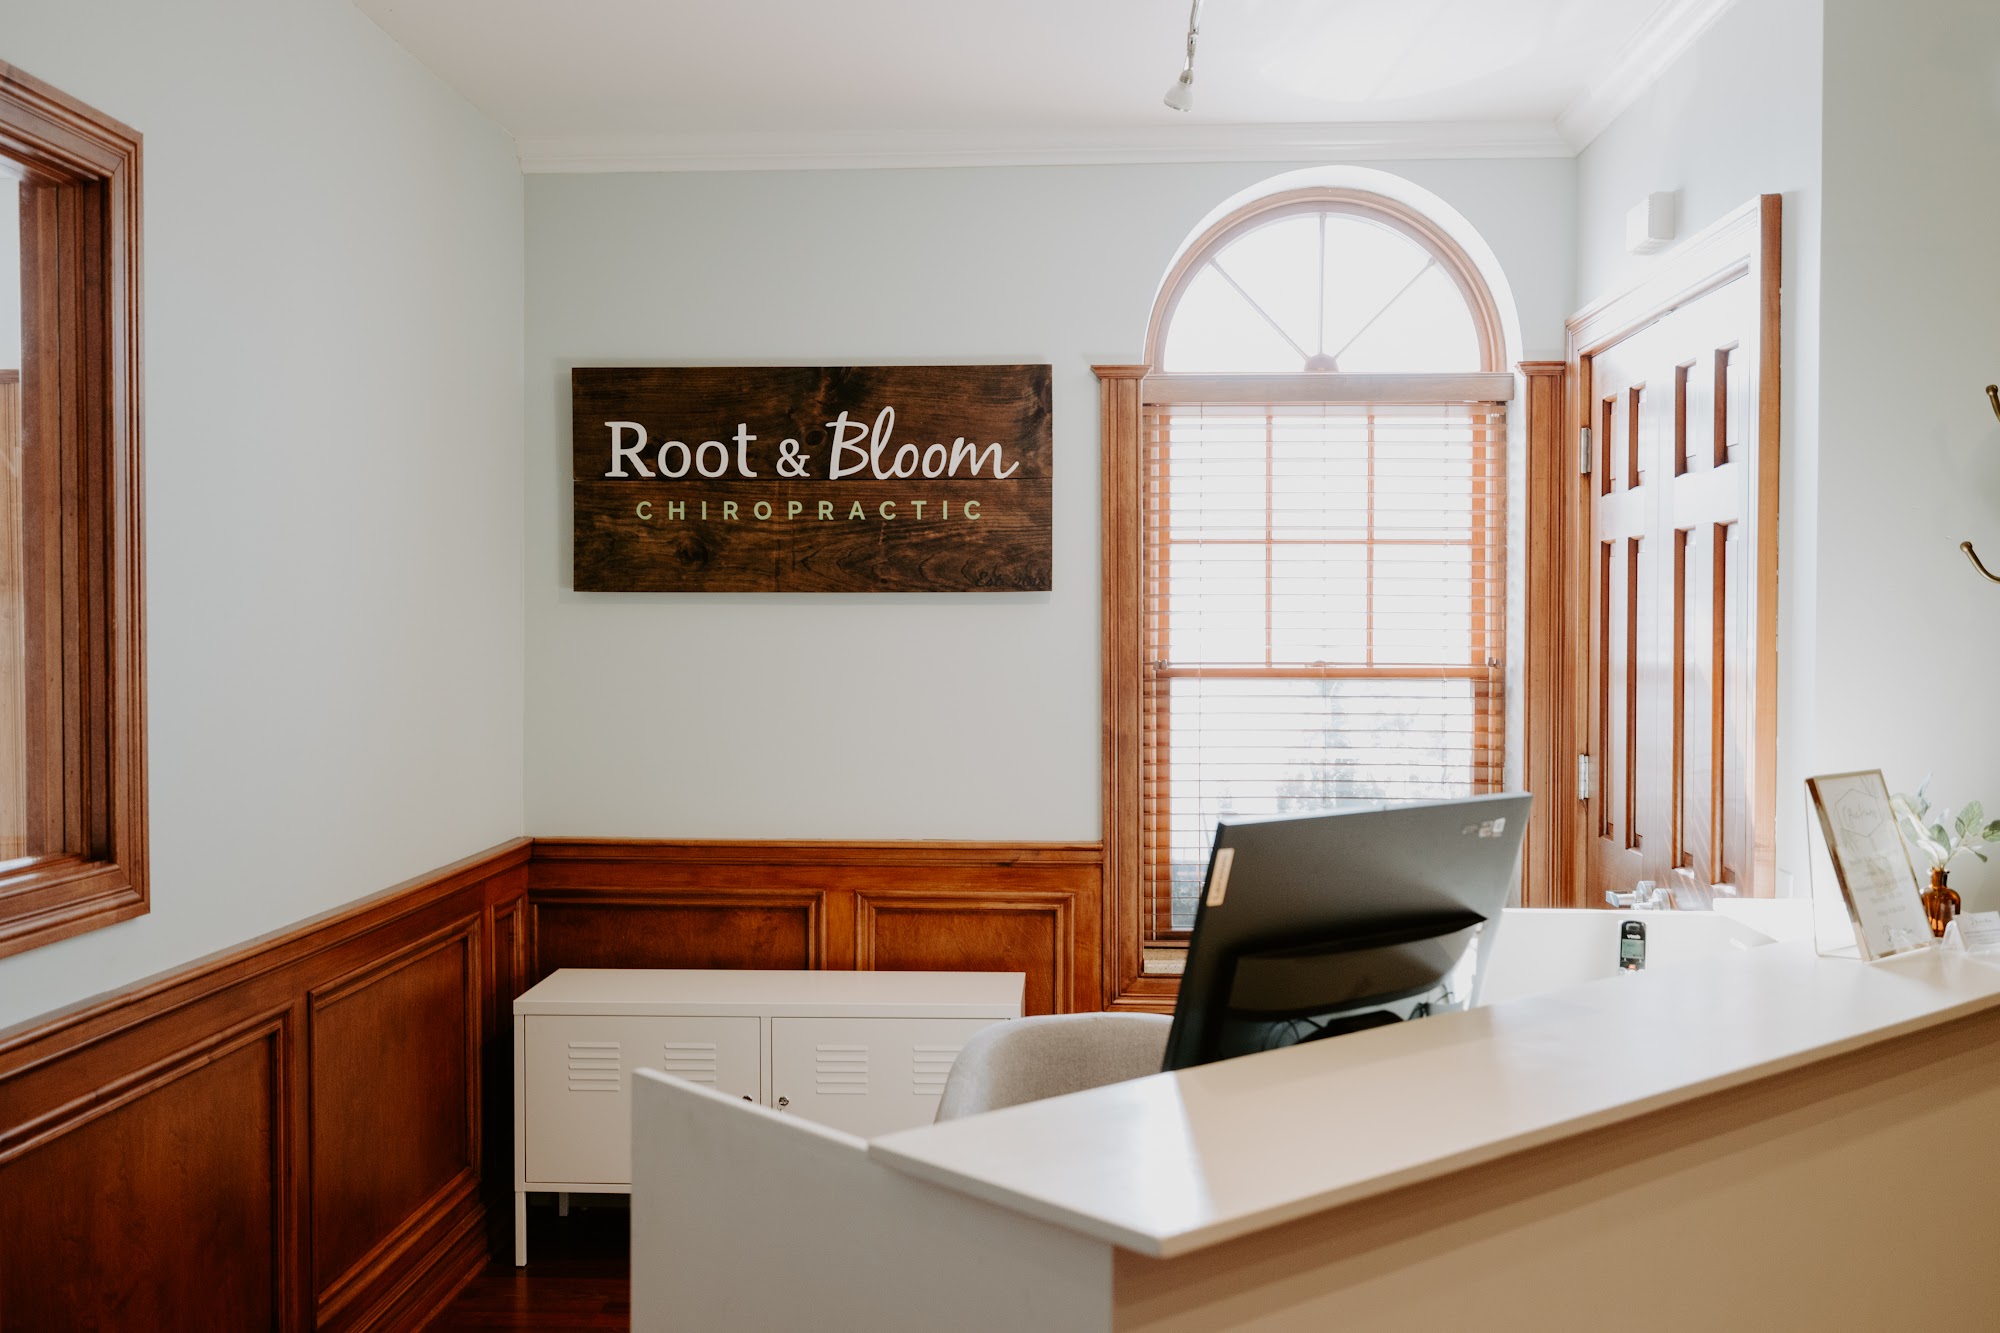 Rooted Chiropractic